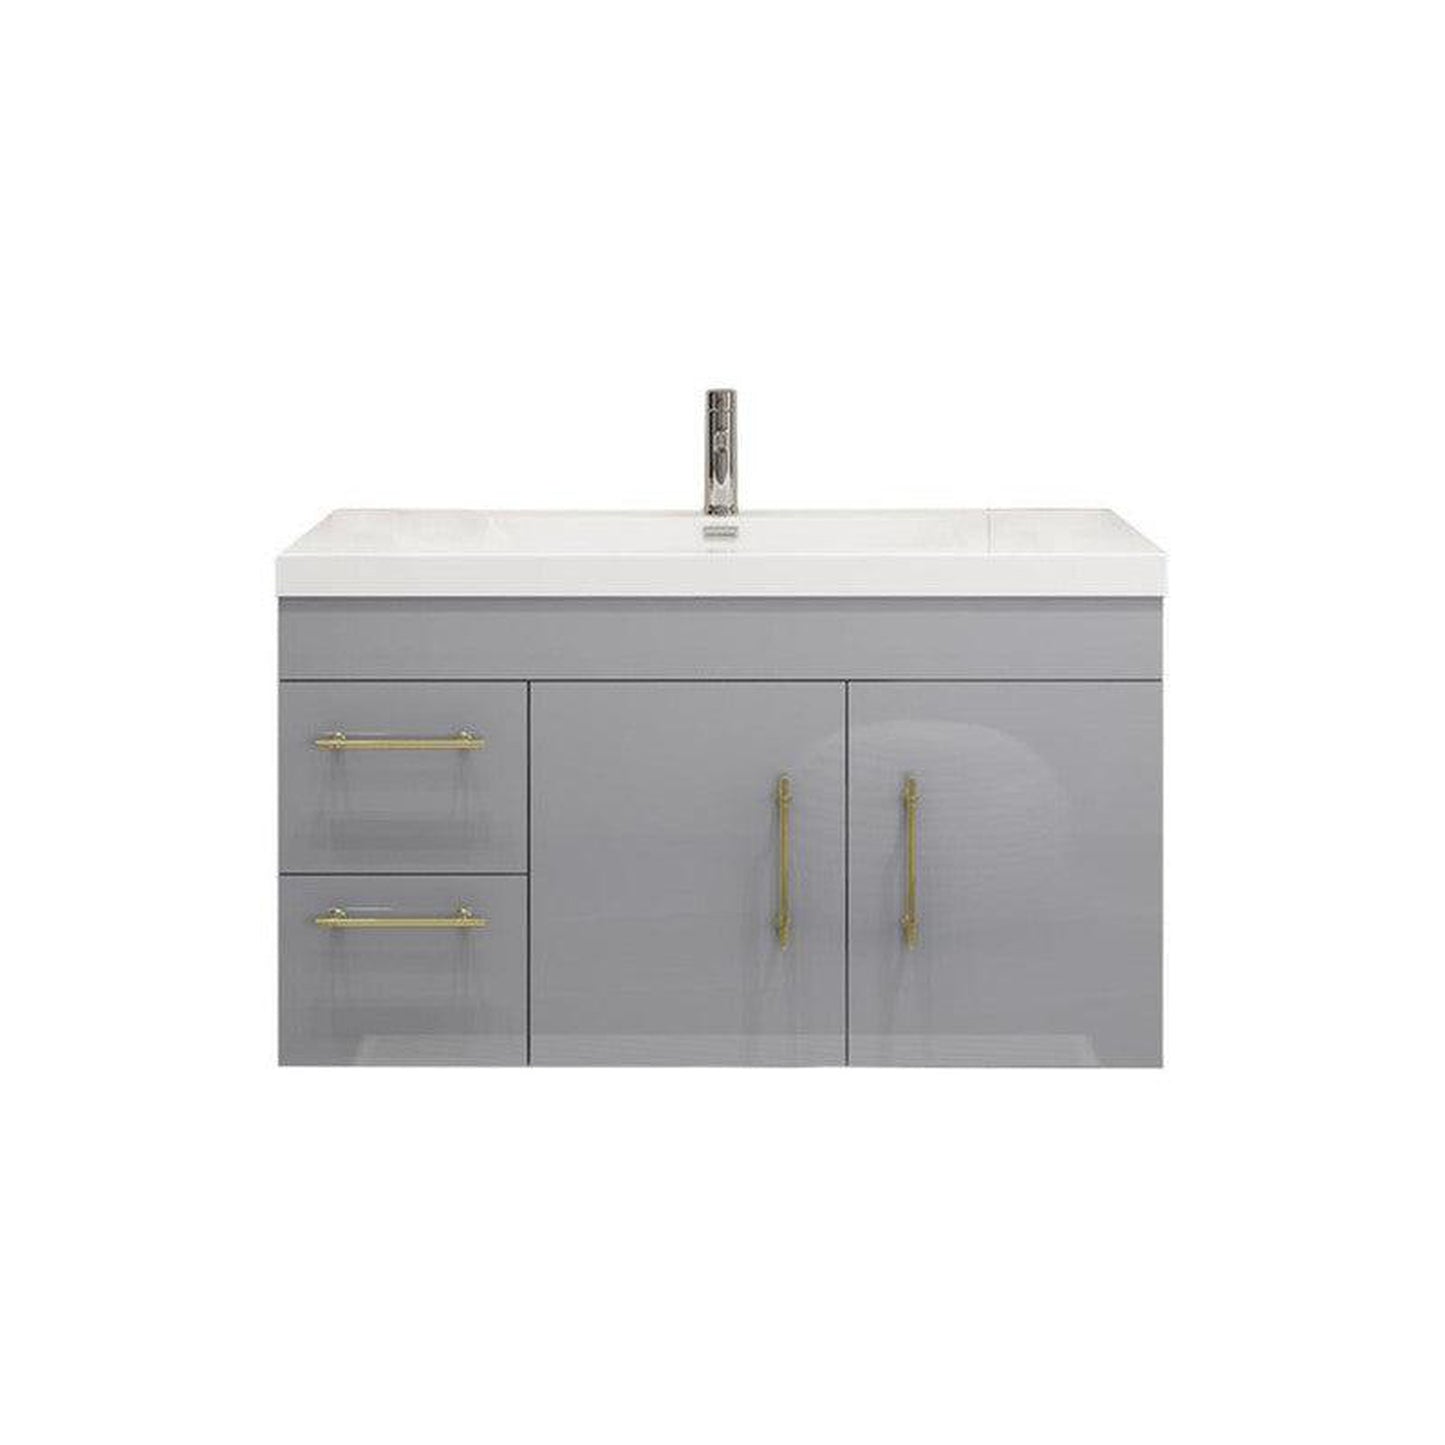 Moreno Bath ELSA 42" High Gloss Gray Wall-Mounted Vanity With Left Side Drawers and Single Reinforced White Acrylic Sink